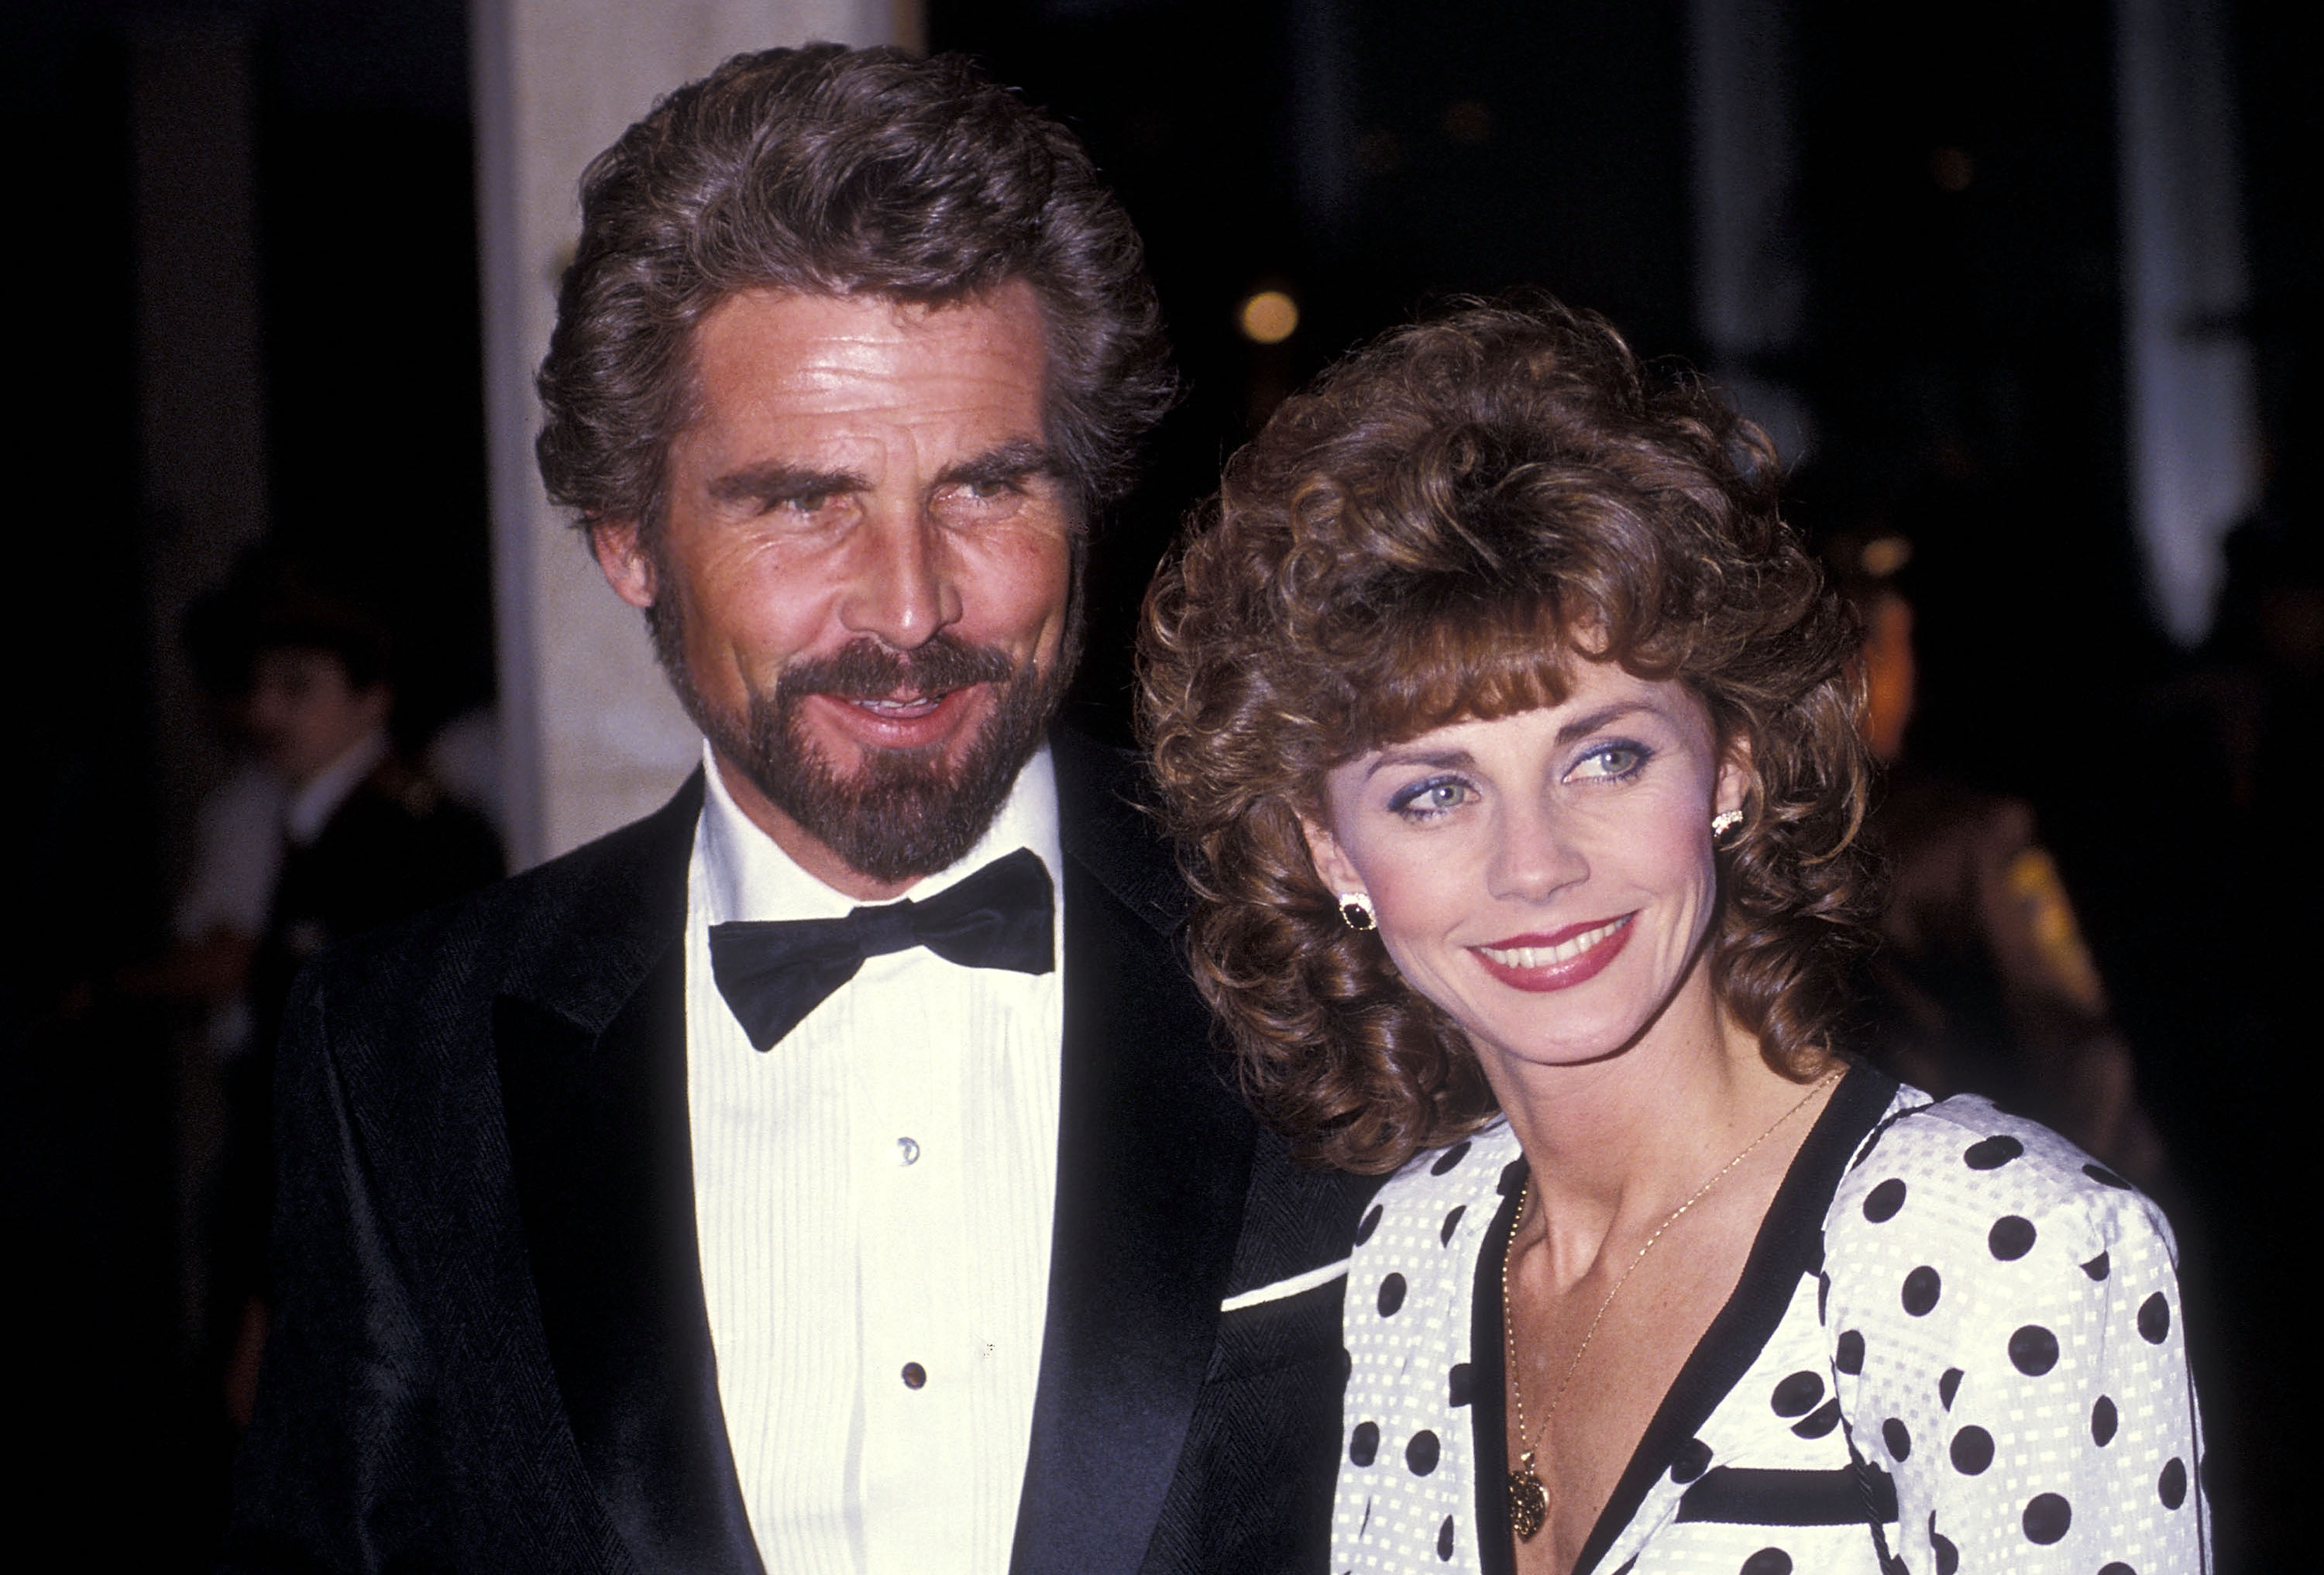 James Brolin and Jan Smithers attend the 42nd Annual Golden Globe Awards at the Beverly Hilton Hotel on January 26, 1985 in Beverly Hills, California | Source: Getty Images